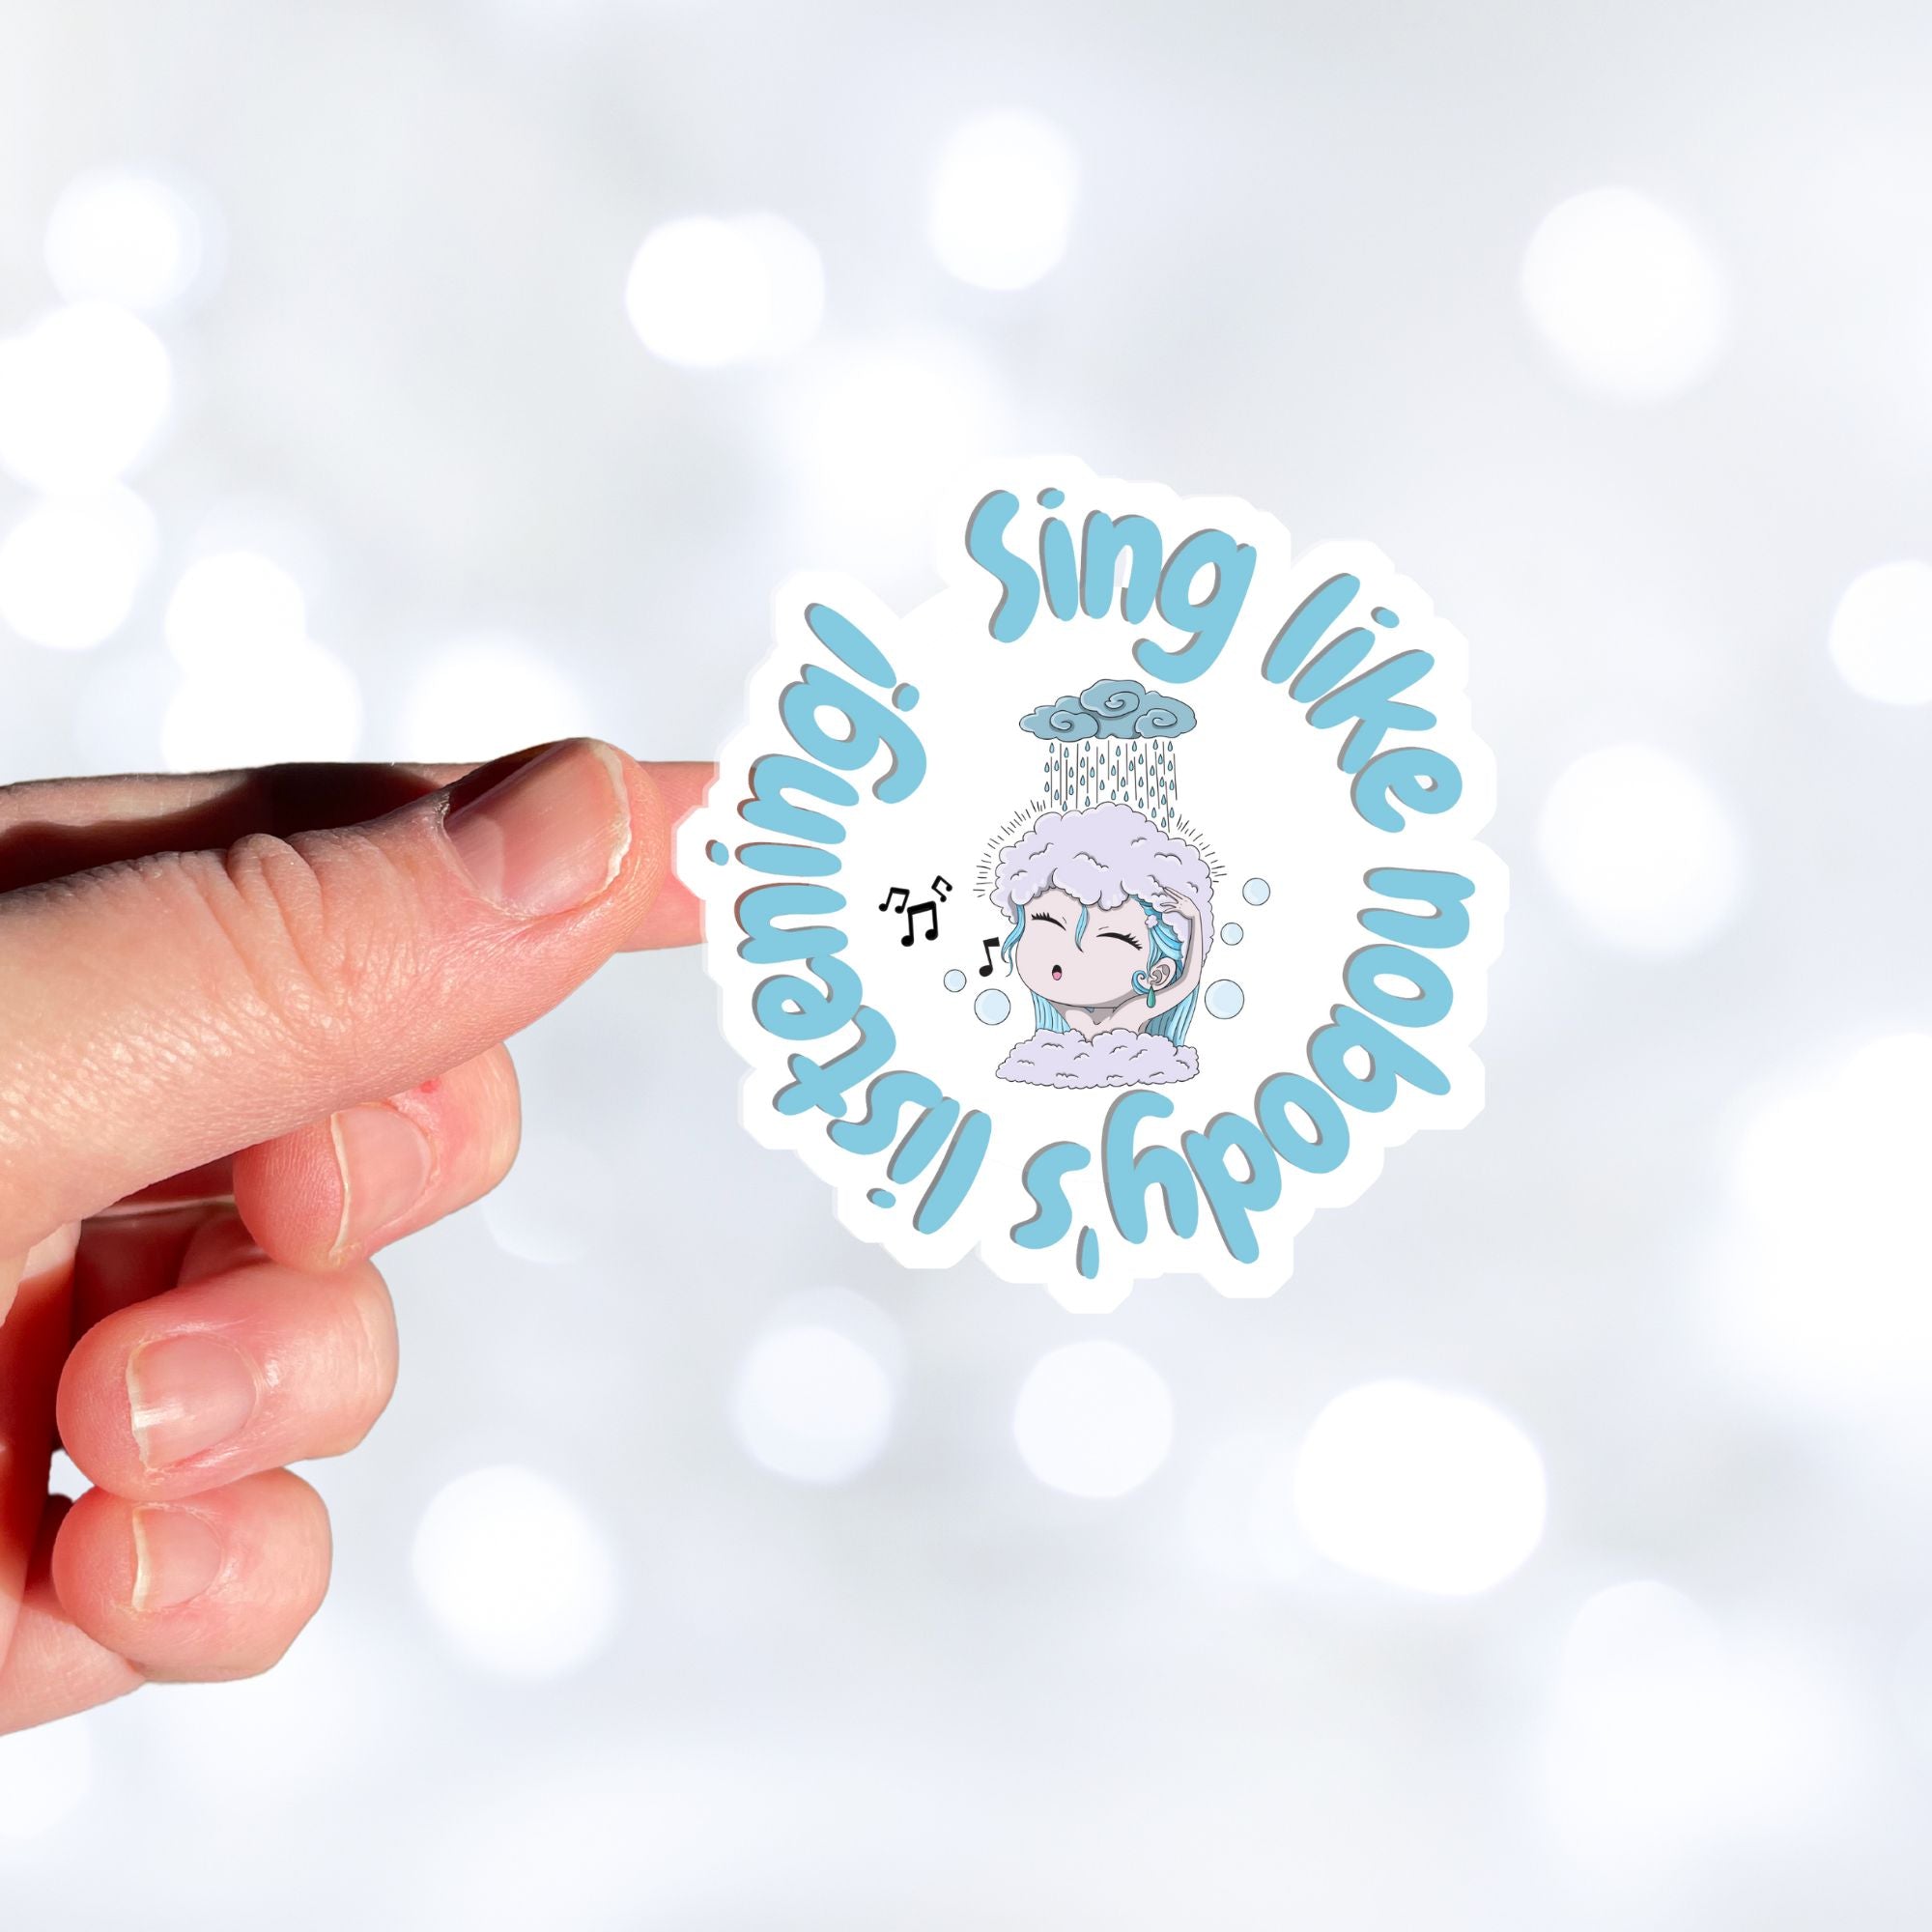 Sing like nobody's listening; dance like nobody's watching. This blue, gray, and white individual die-cut sticker features someone singing in the shower. This image shows a hand holding the Sing like nobody's listening sticker.